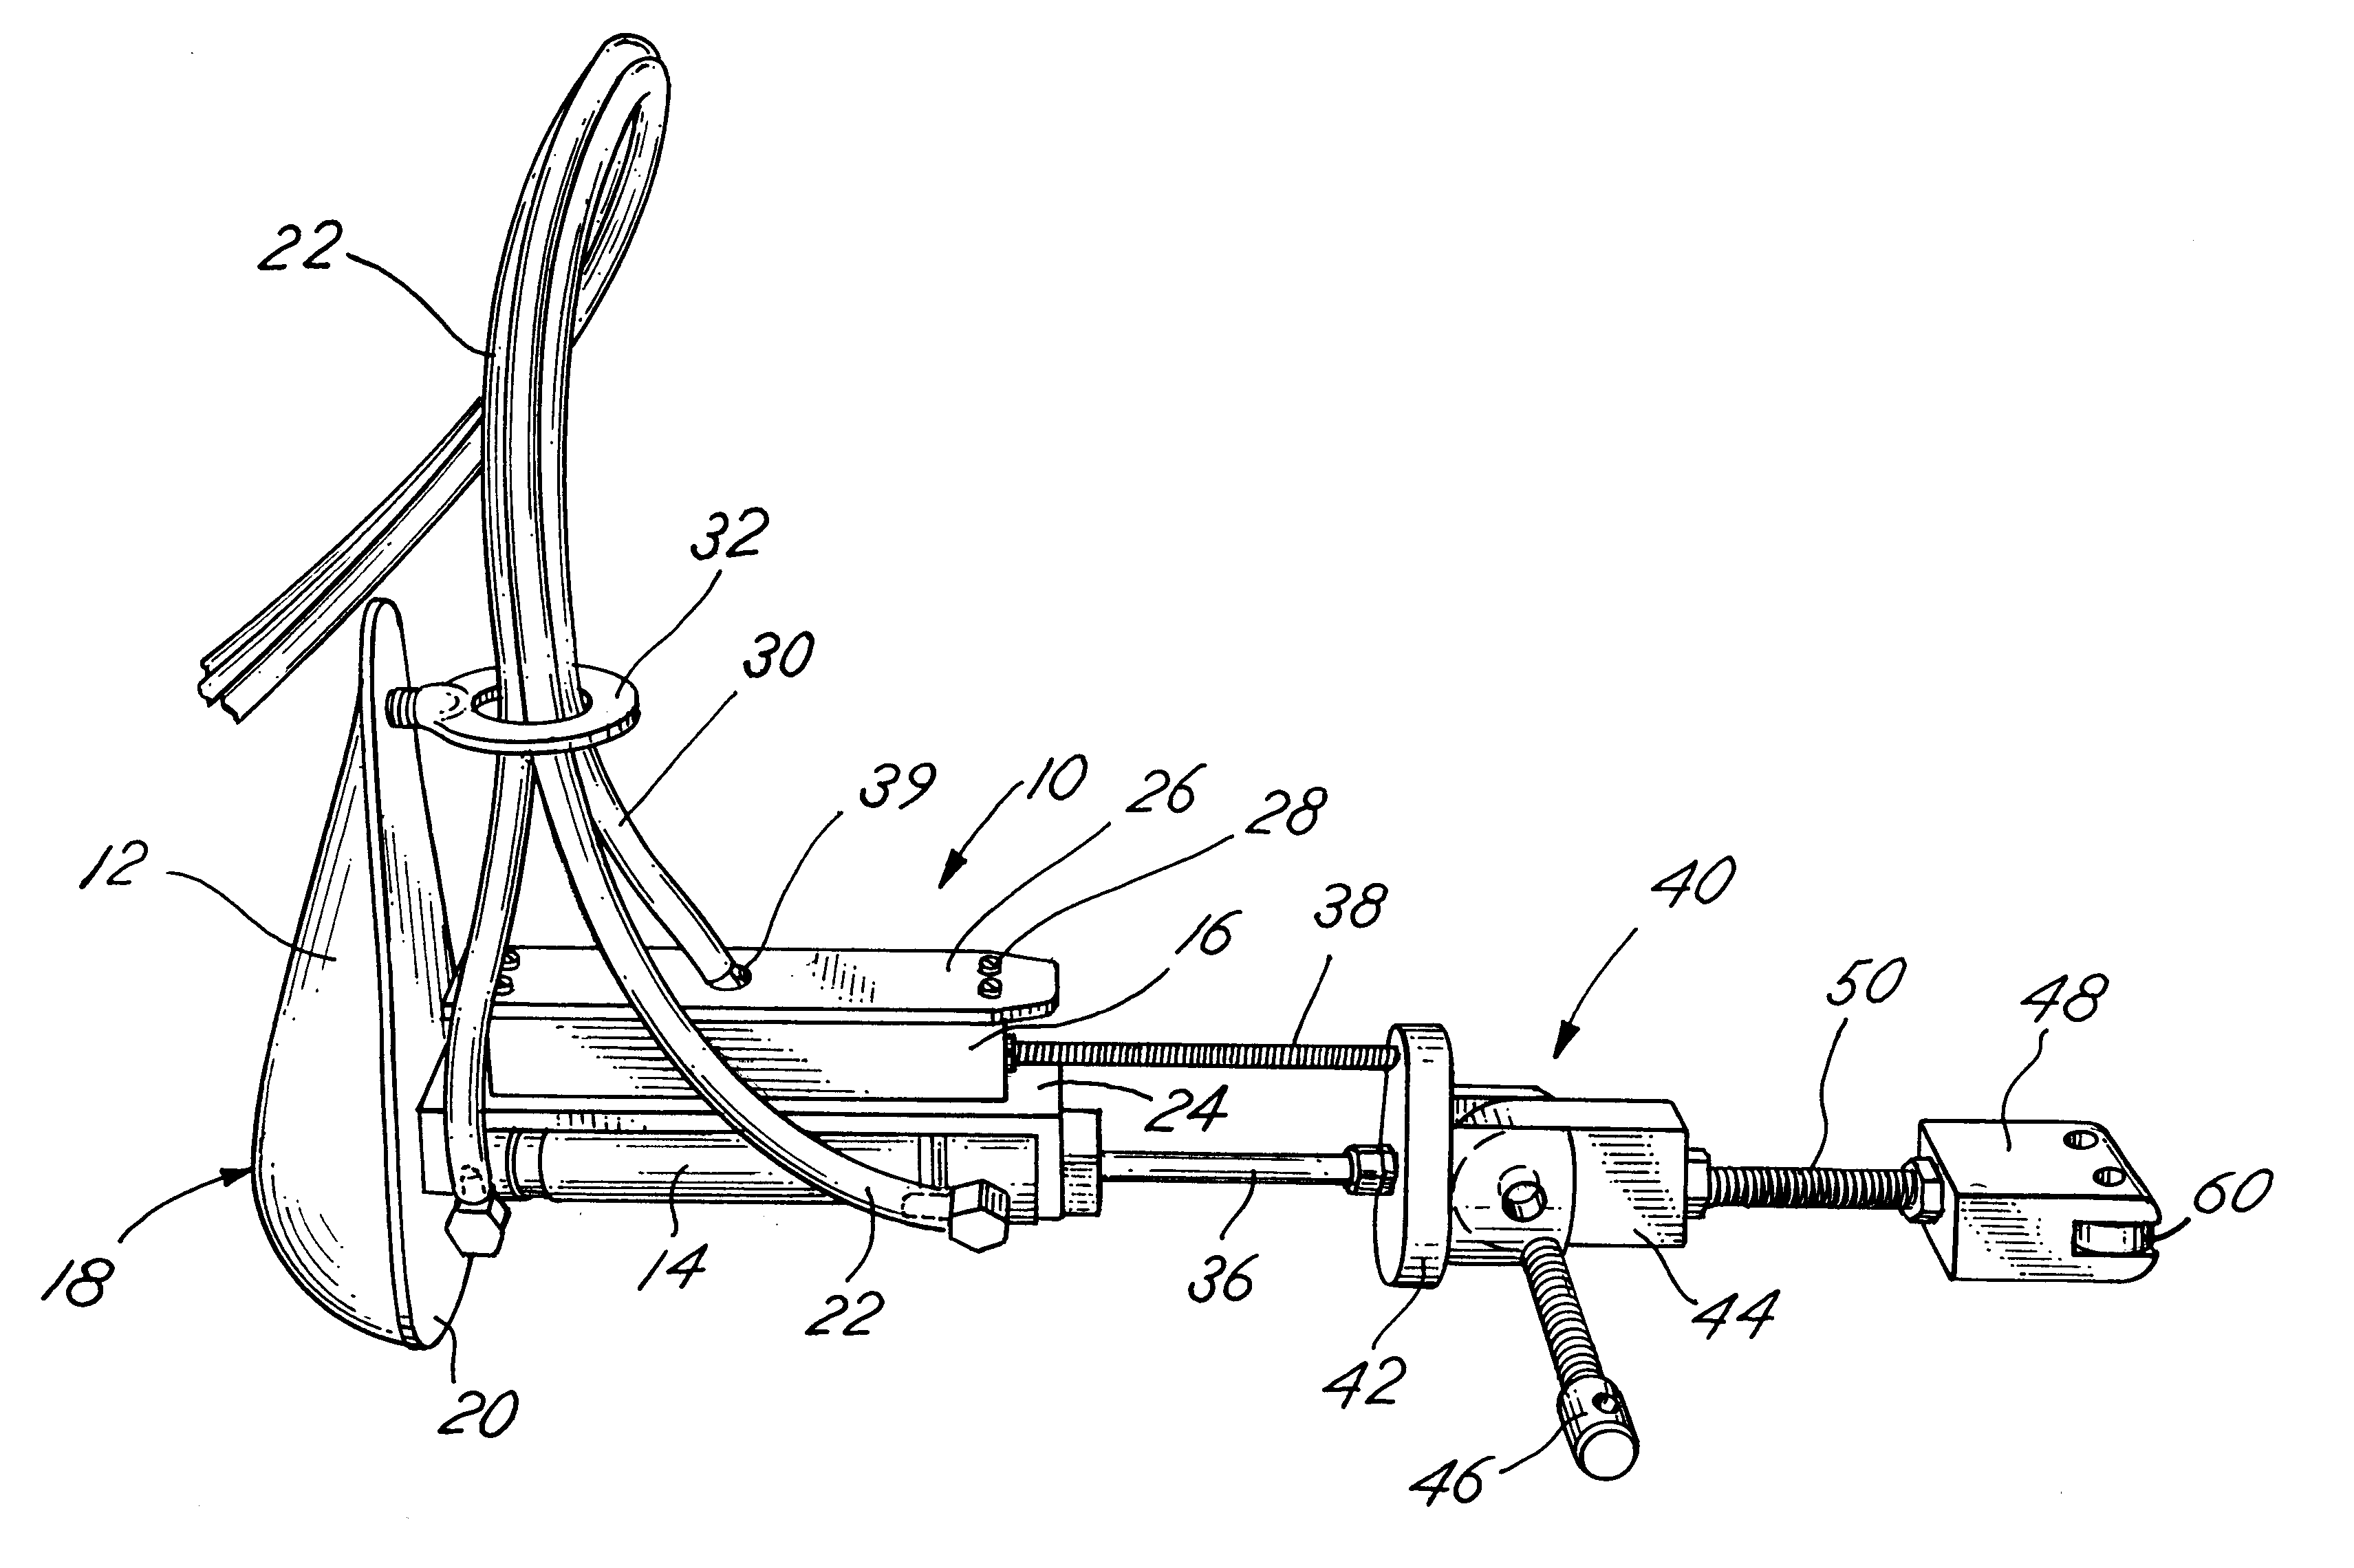 Internal shoe sizing apparatus and method for sizing shoes